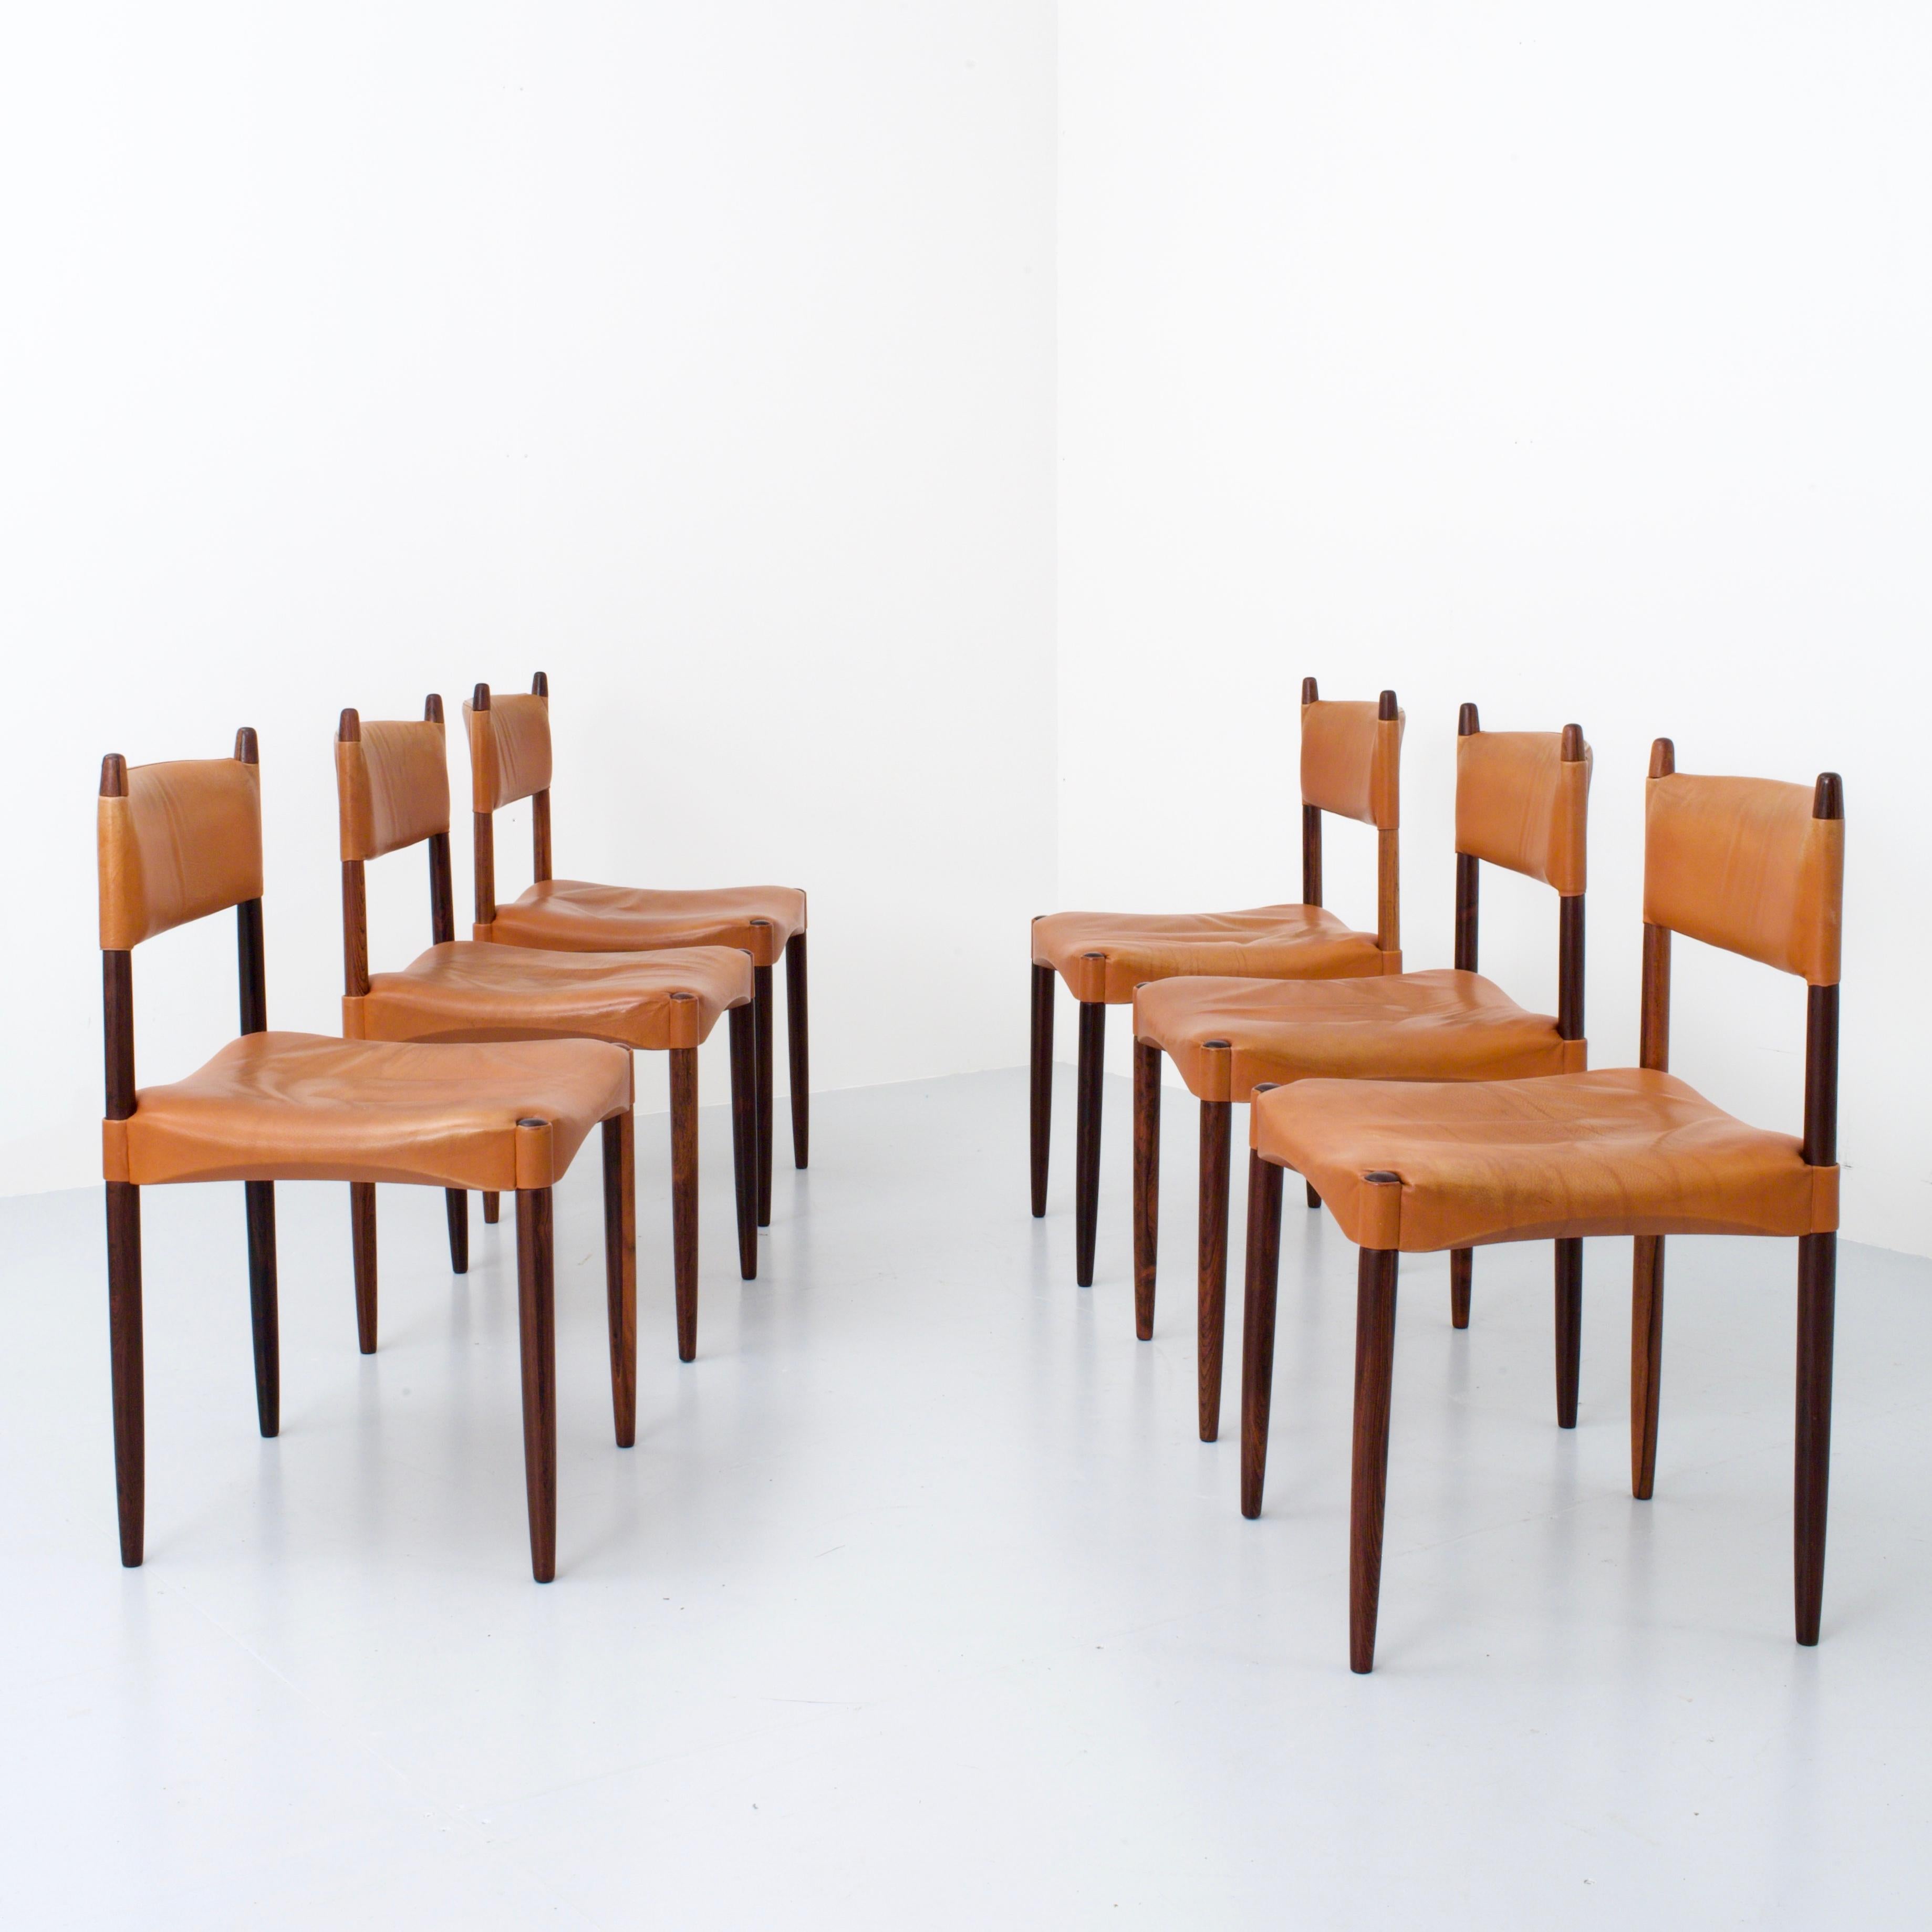 This beautifully detailed set of chairs by Anders Jensen for Holstebro Møbelfabrik features a luminous dark Brazilian rosewood frame and patinated cognac-coloured leather used for the seating and the back rest. Very outspoken flames in the rosewood